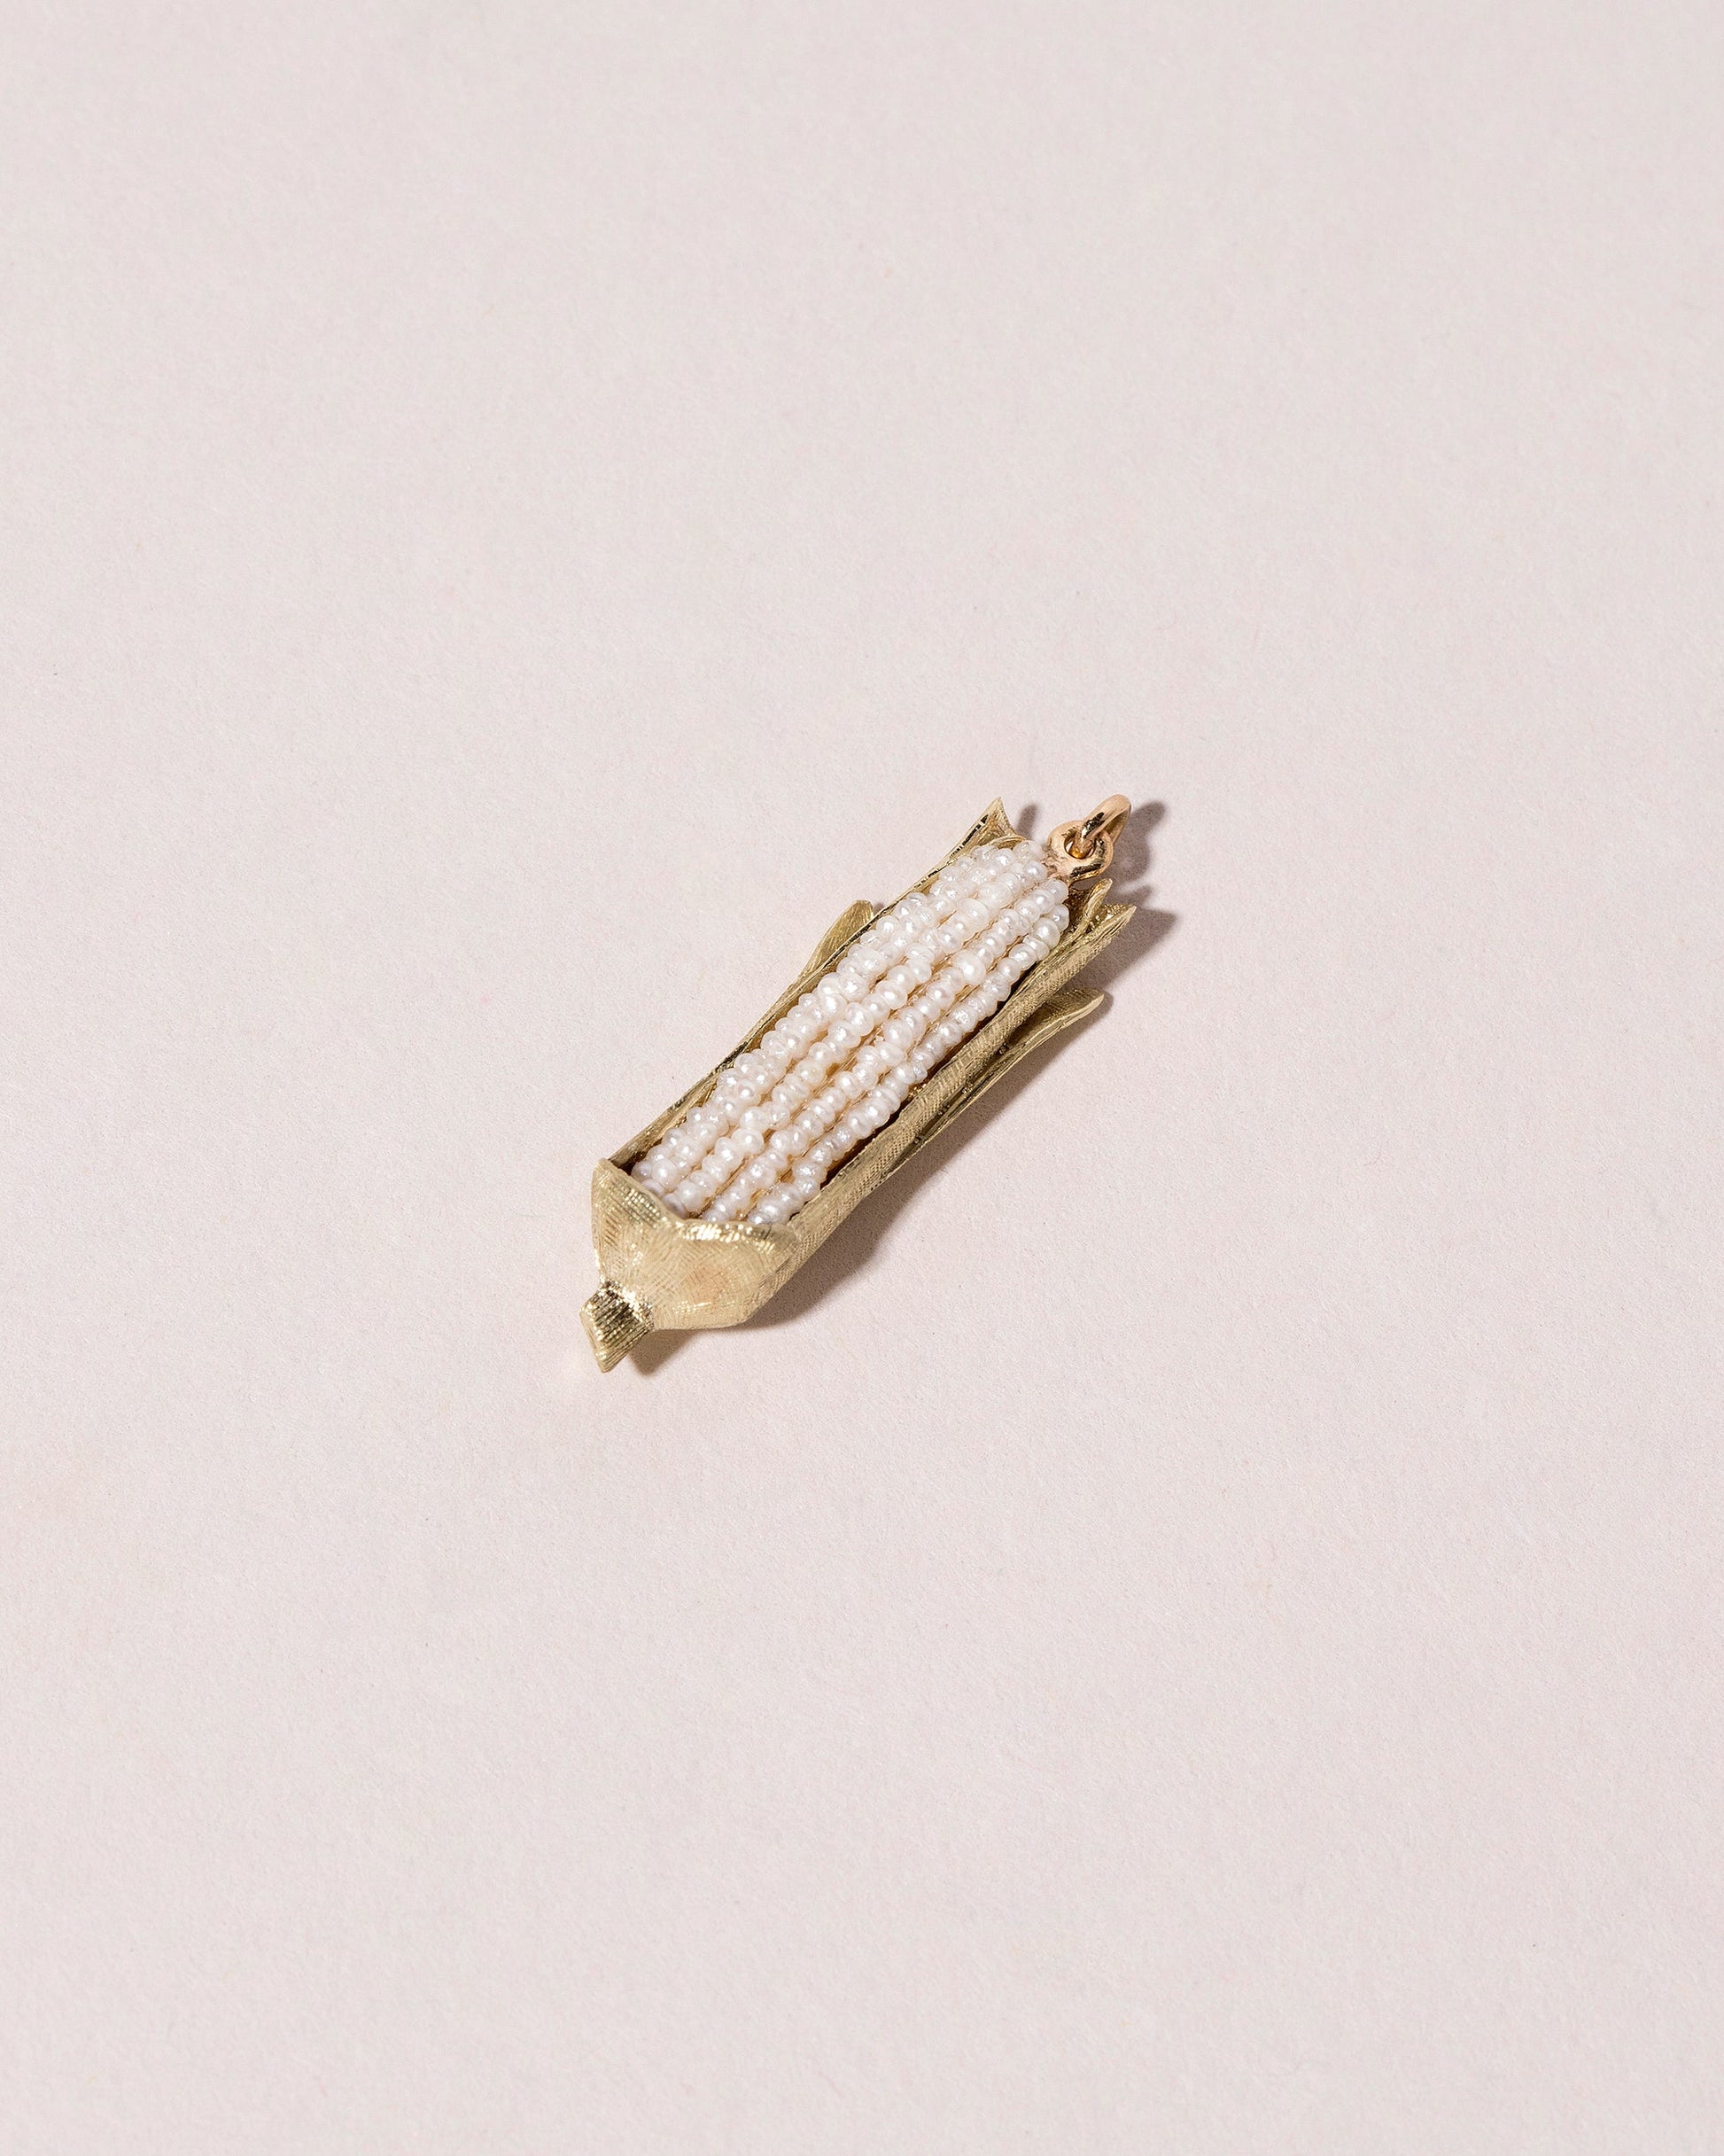  Corn on the Cob Charm on light color background.